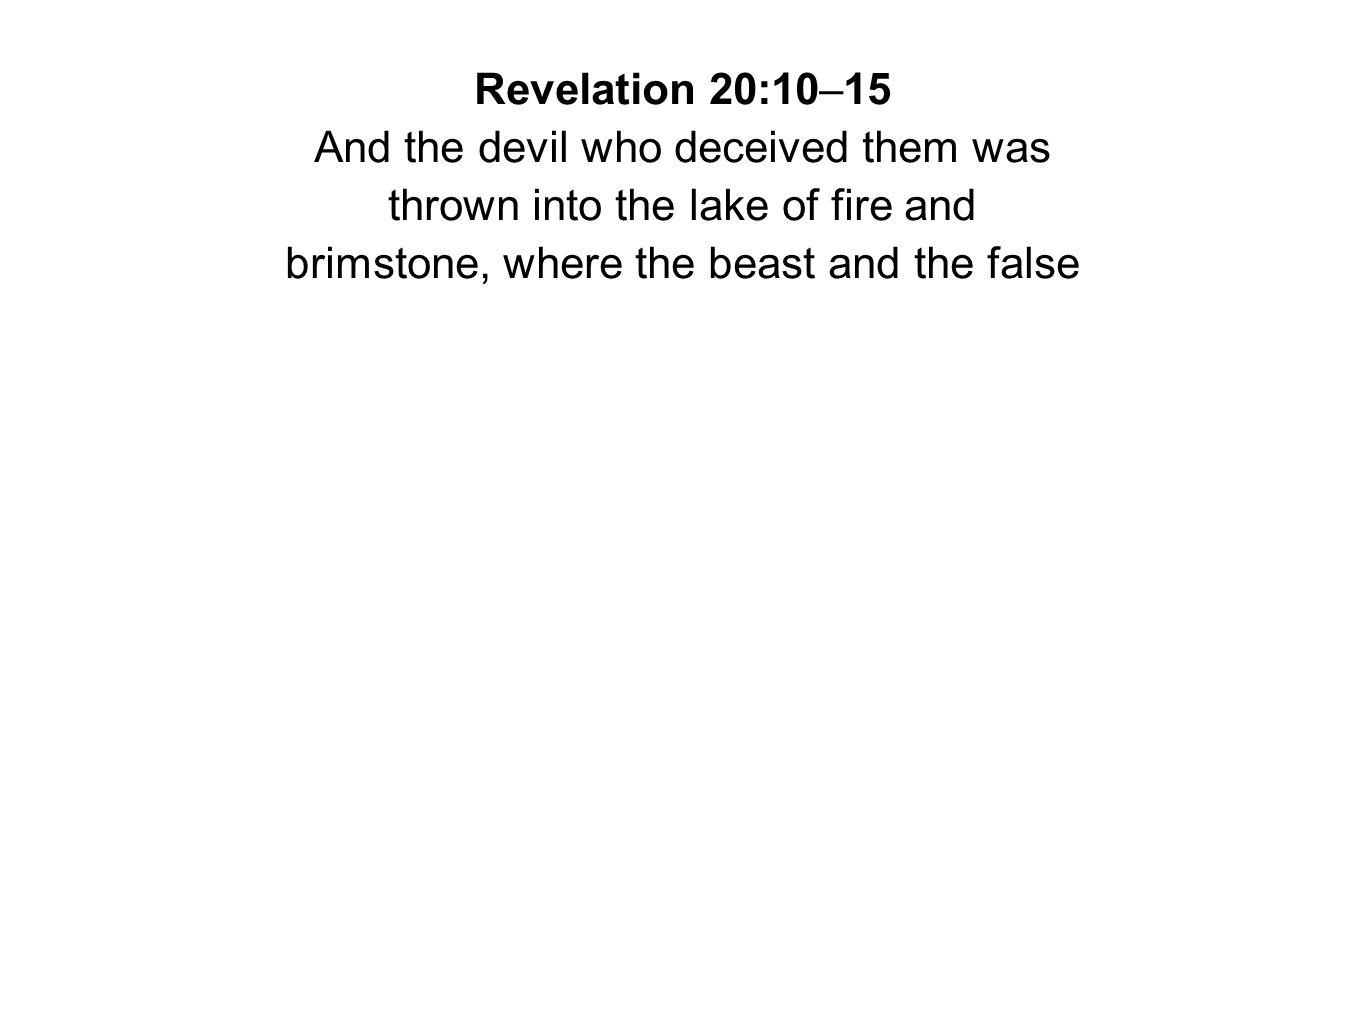 Revelation 20:10–15 And the devil who deceived them was thrown into the lake of fire and brimstone, where the beast and the false